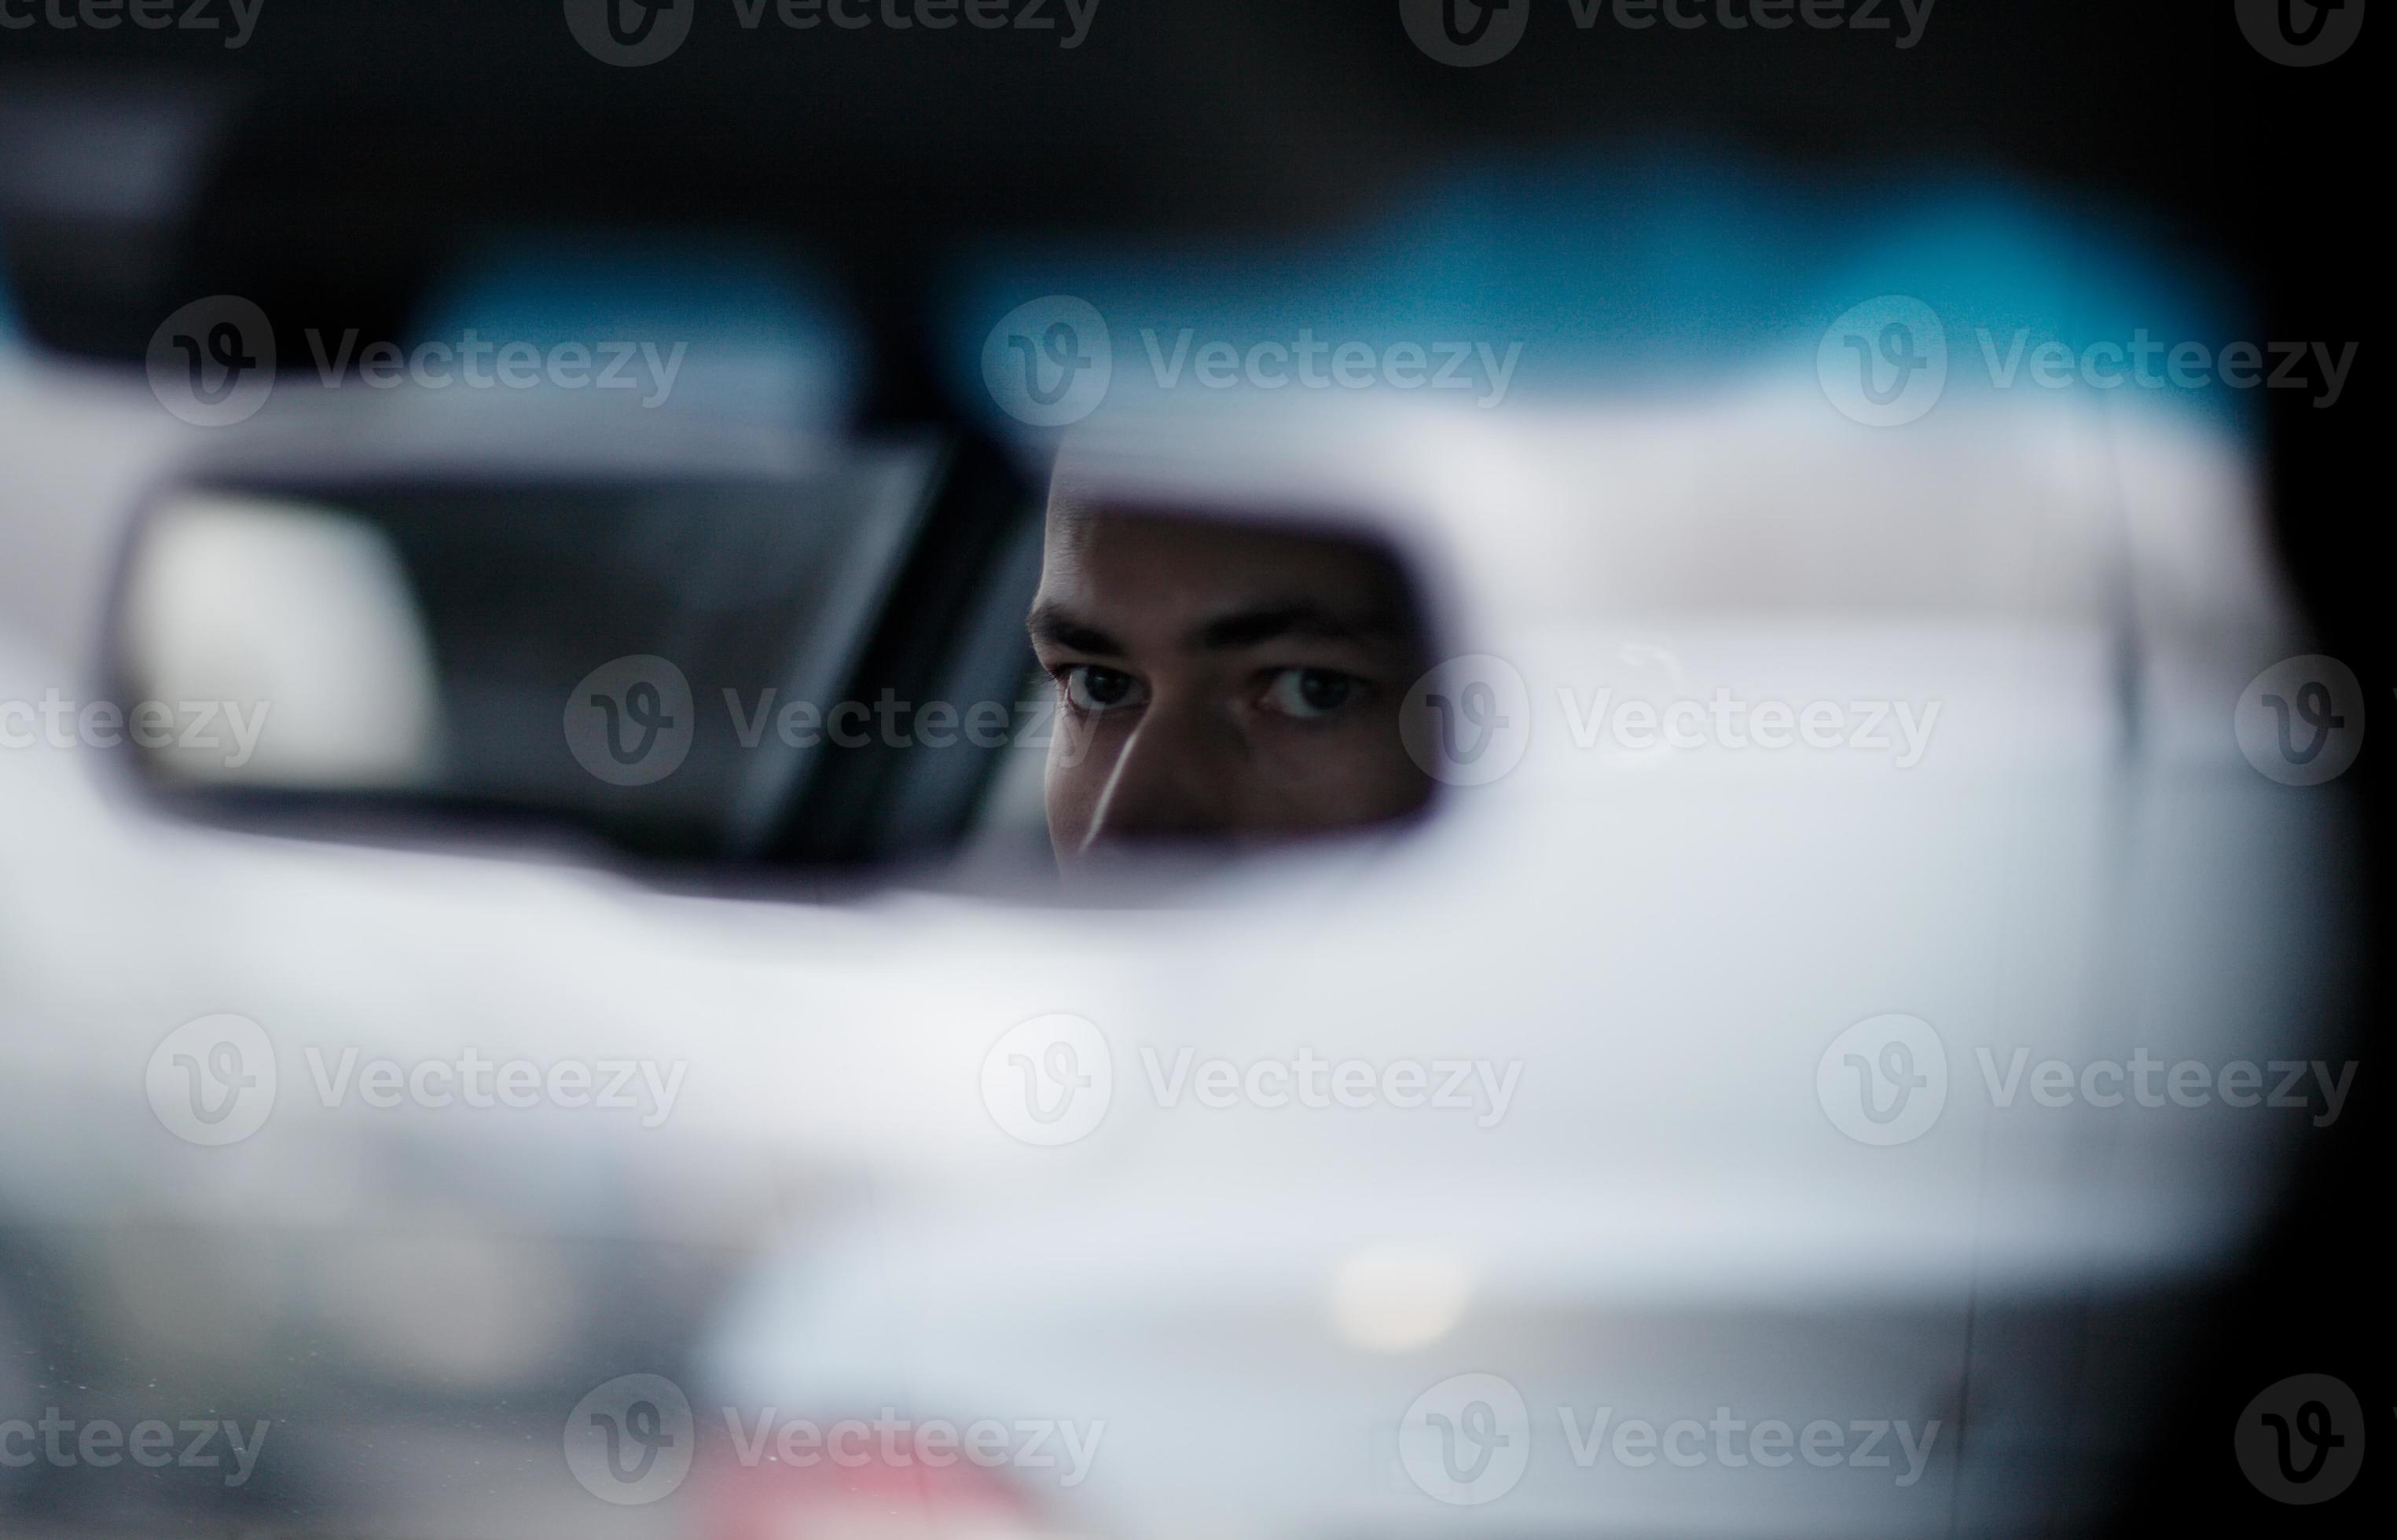 man-looking-in-the-rear-view-mirror-while-driving-photo.jpg